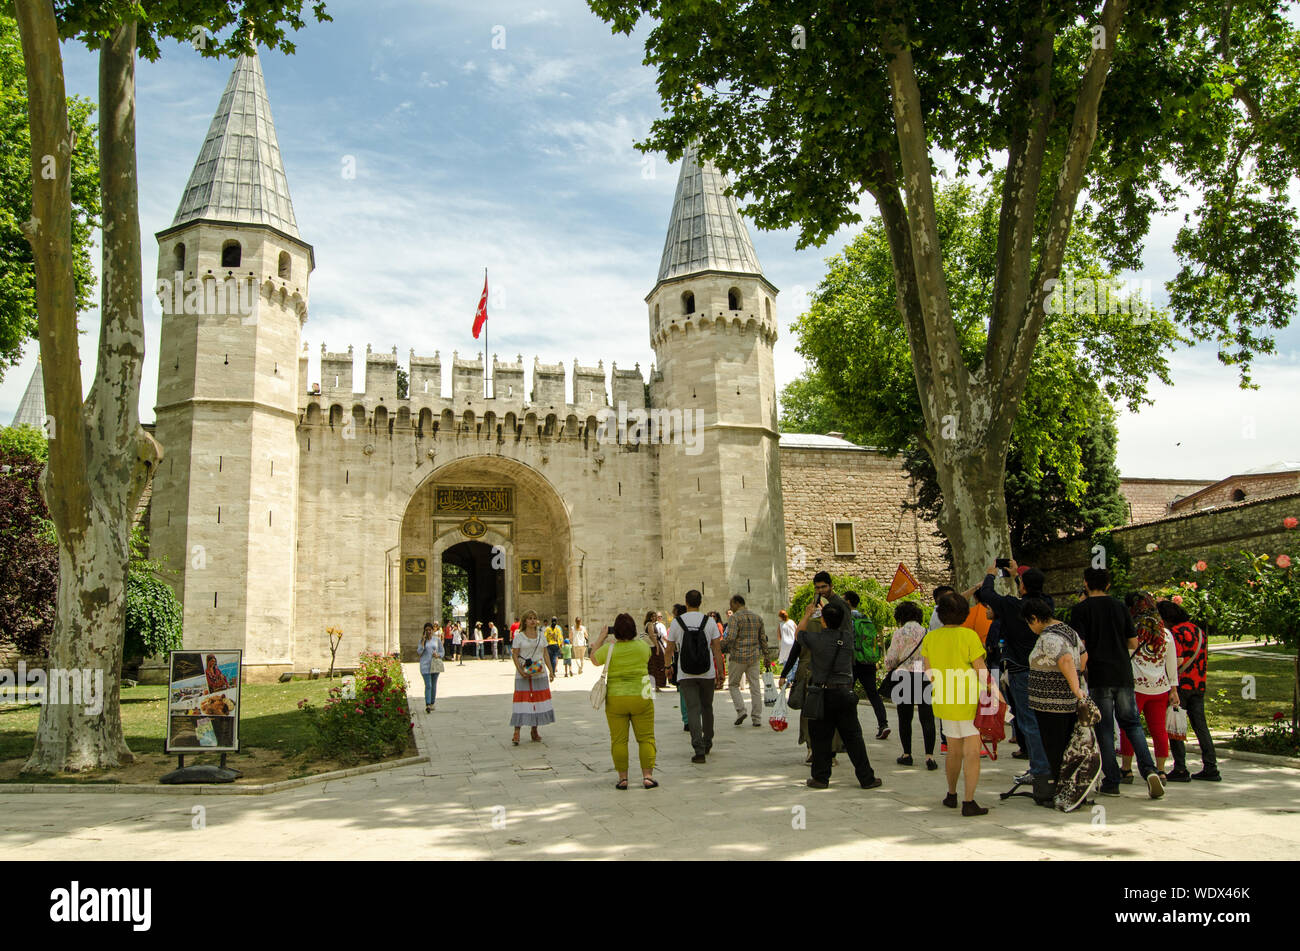 Istanbul, Turkey - June 6, 2016: Crowds of tourists enjoying the spectacular grounds and buildings of Topkapi Palace in Istanbul, Turkey. Stock Photo